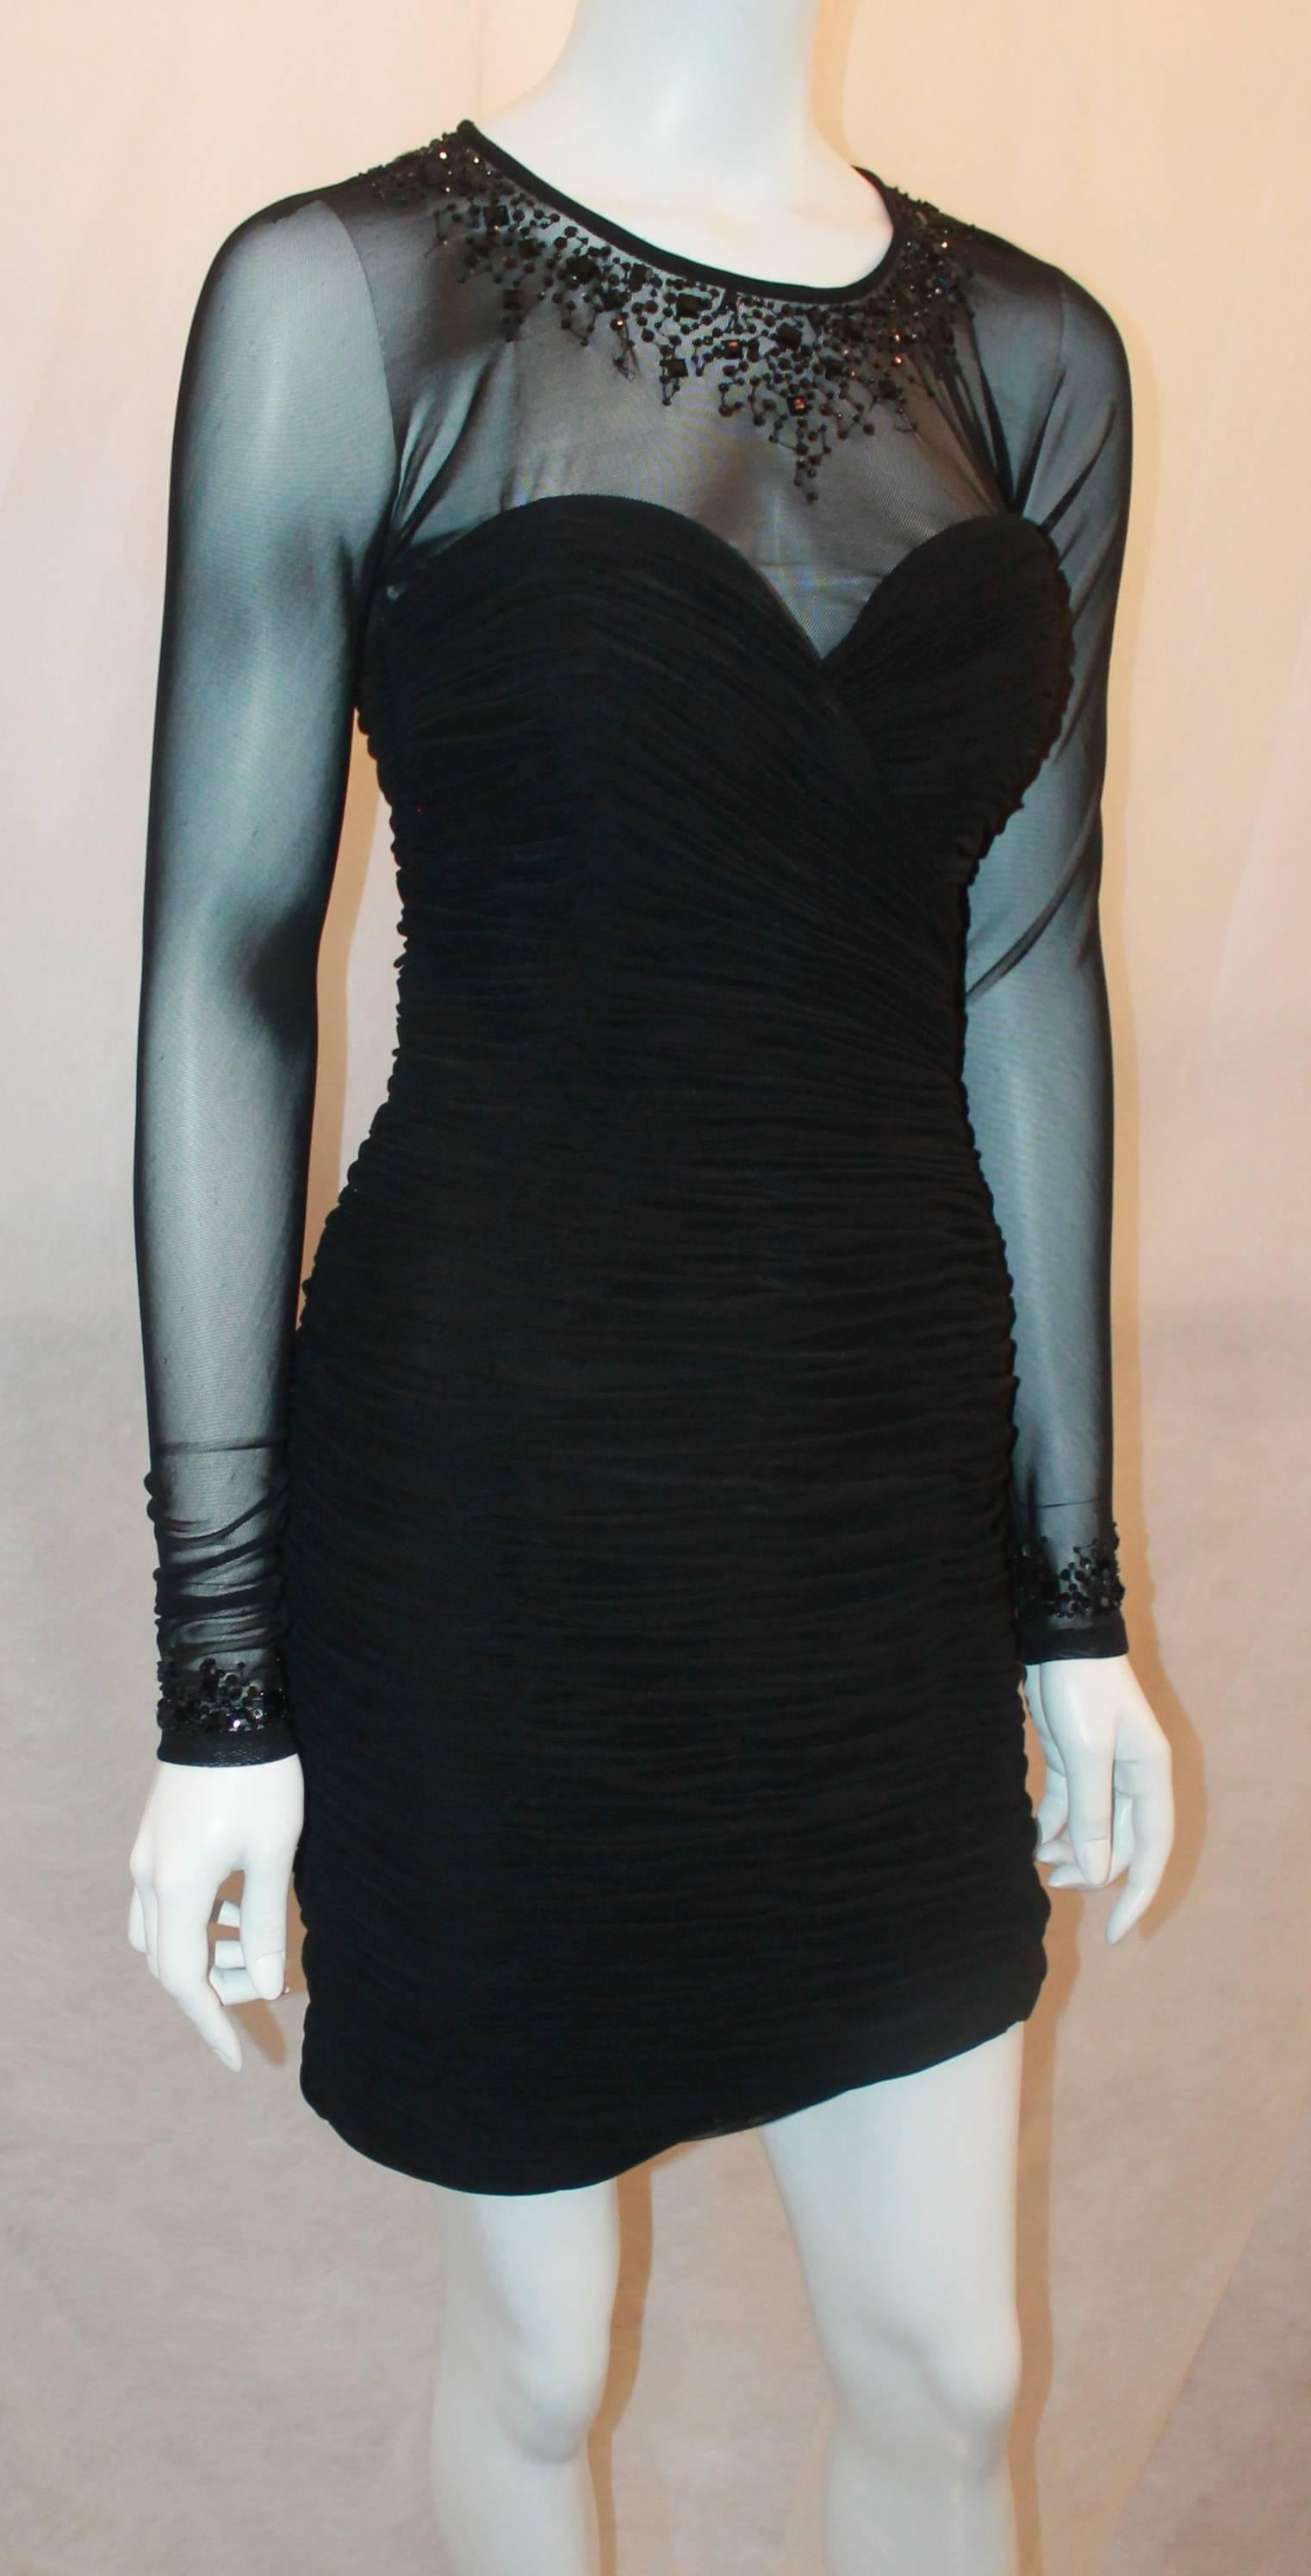 Vicky Tiel Black Jersey Cocktail Dress w/ Beading Around the Neck & Wrists - 6.  This gorgeous dress is in excellent condition.  It features a lovely black silk jersey, beading around the neck and wrists, sheer mesh, a back top button, and it is